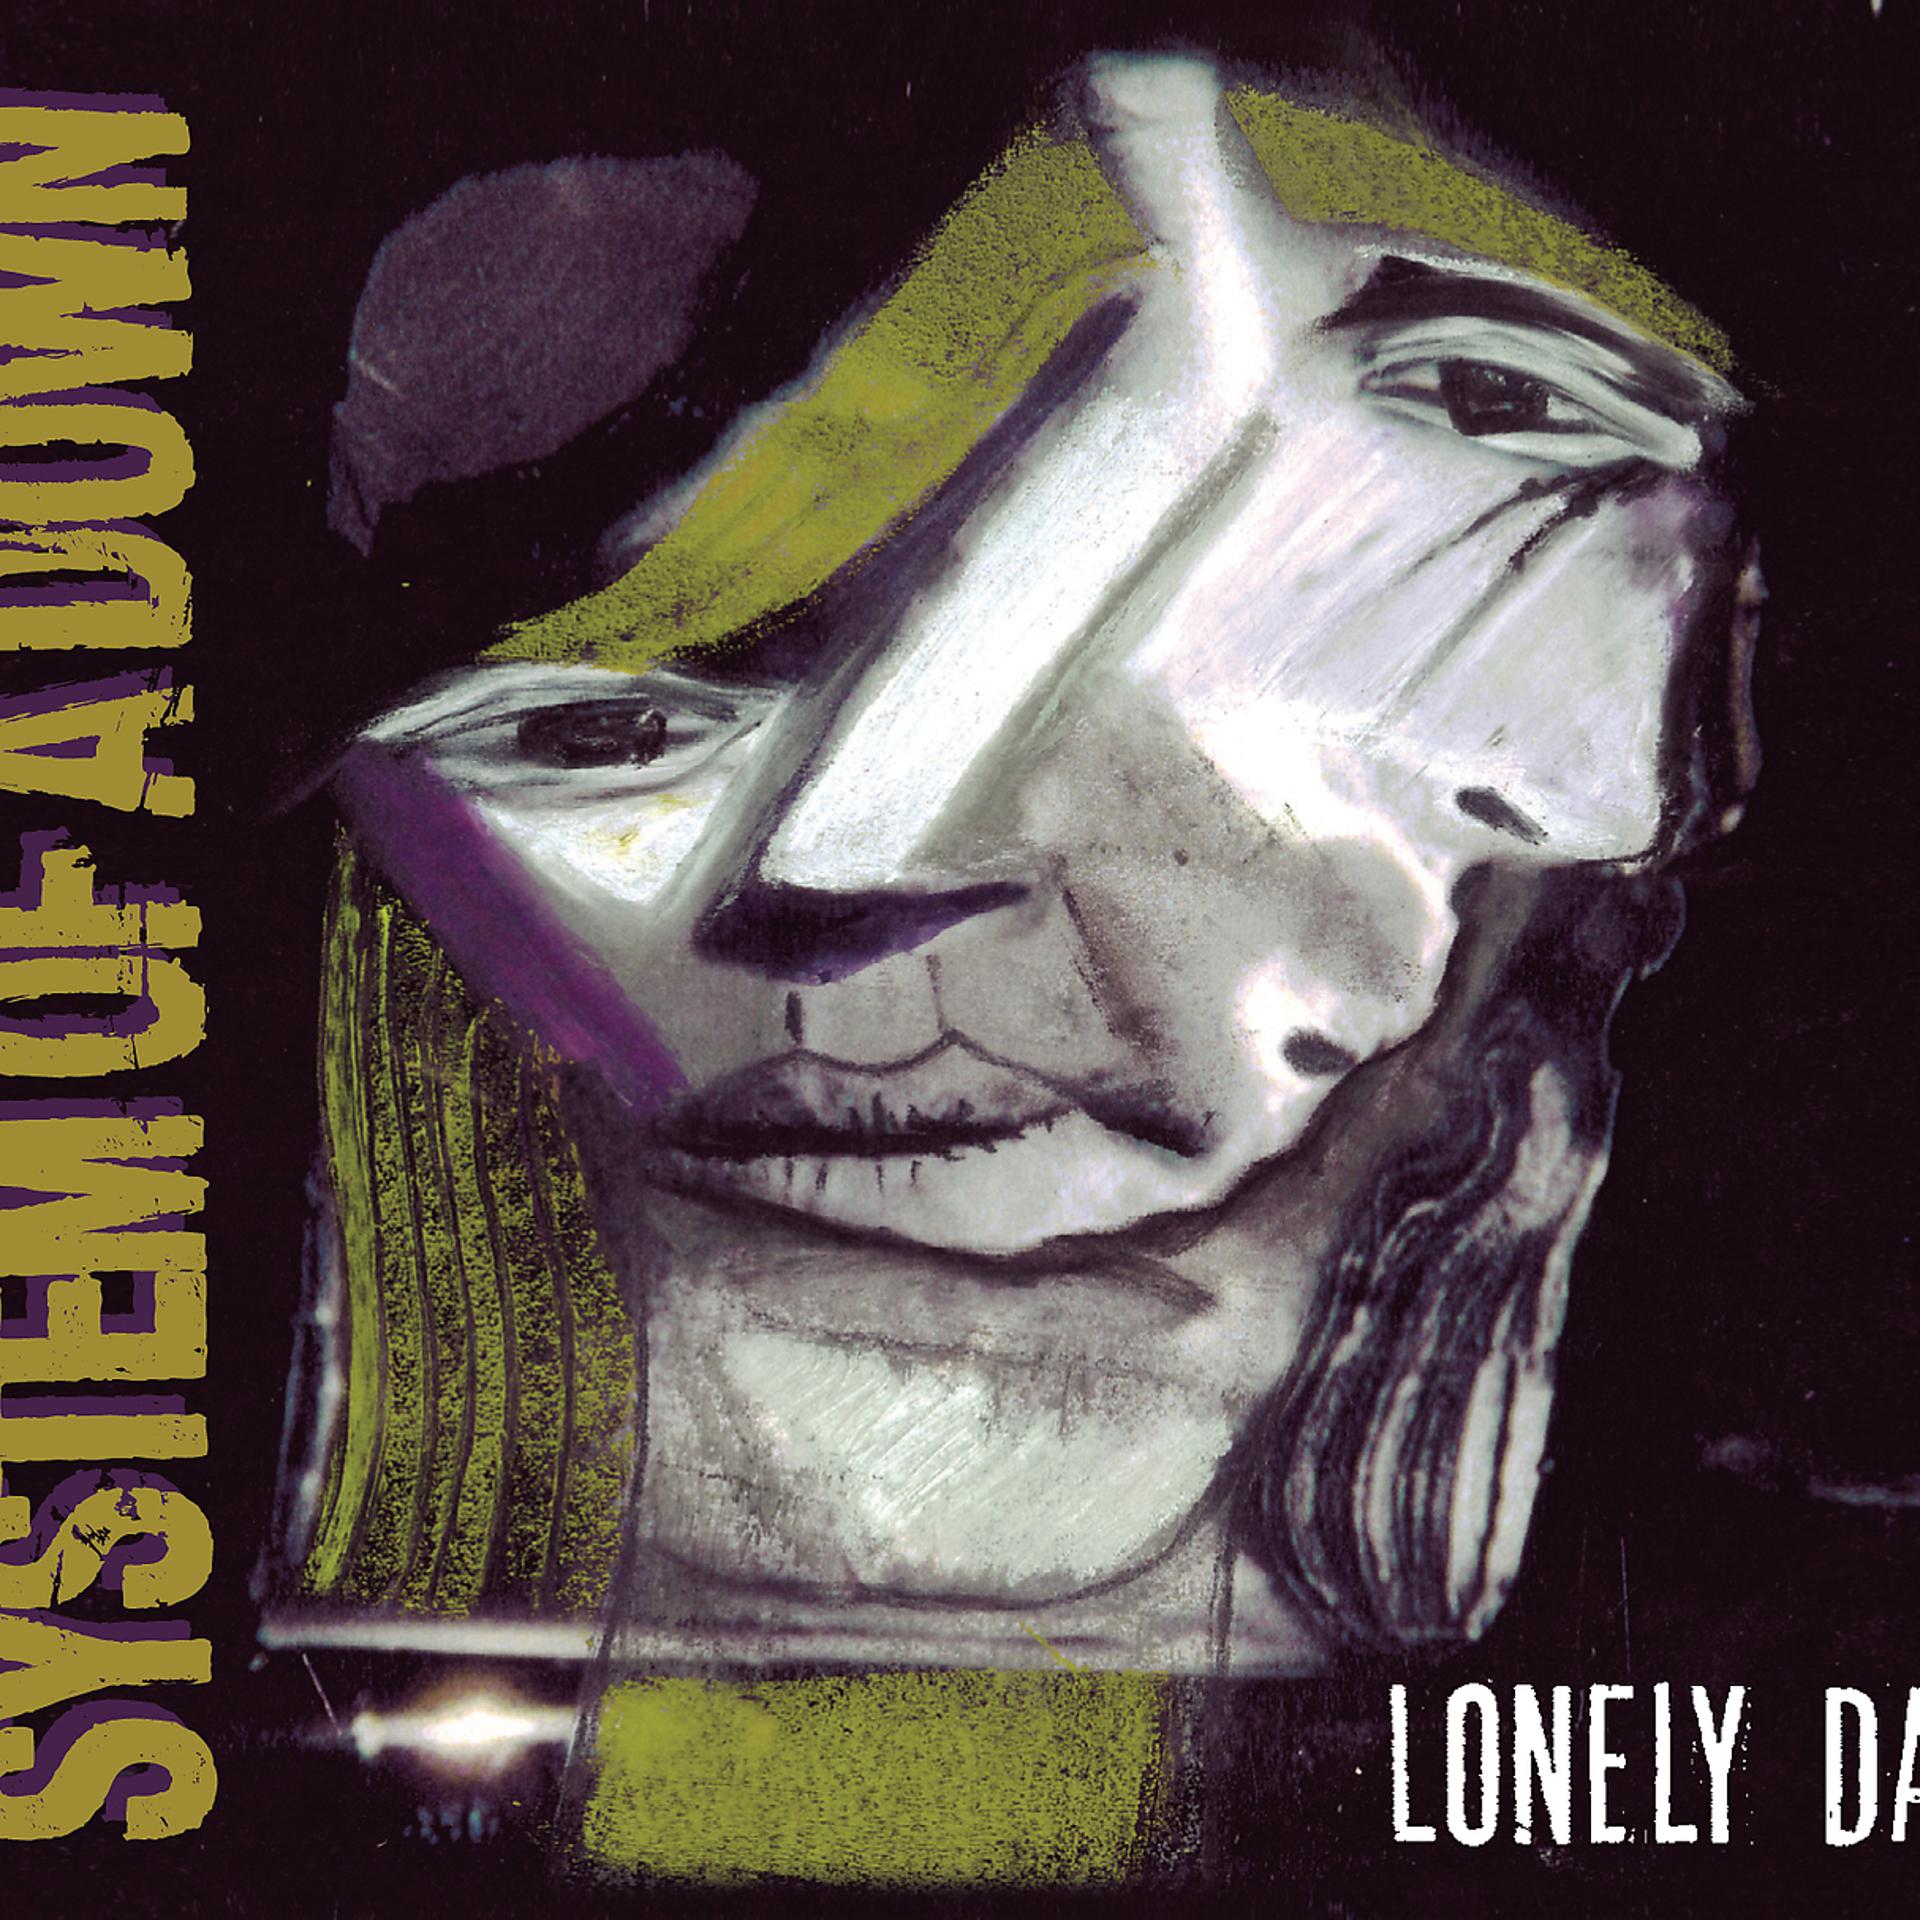 Lonely Day System of a down. System of a down Lonely Day альбом. Lonely Day обложка. SOAD Lonely Day обложка.